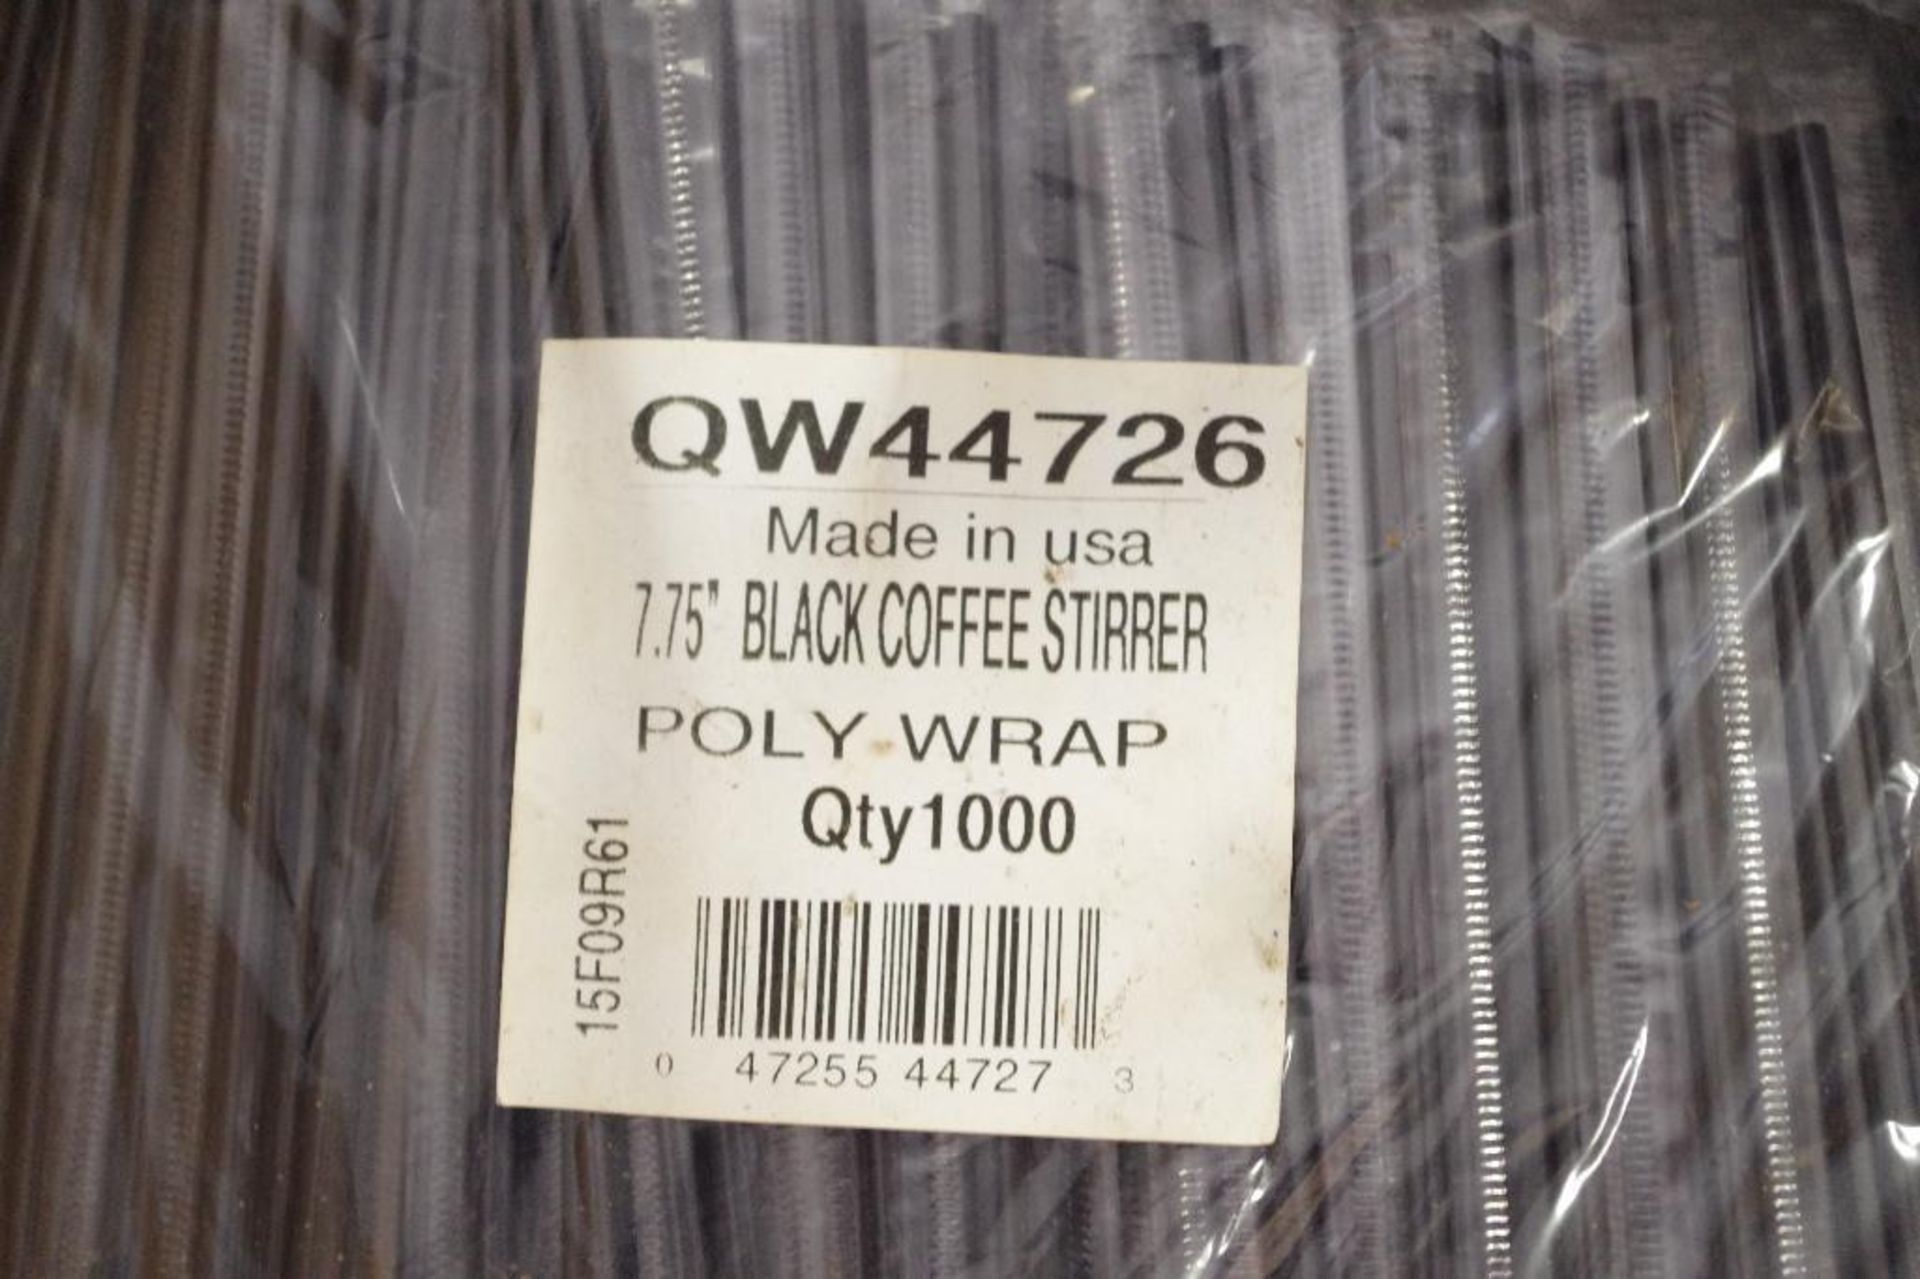 [10,000] 7-3/4" Black Coffee Stirrers (10 Packs of 1000) Made in USA - Image 2 of 3